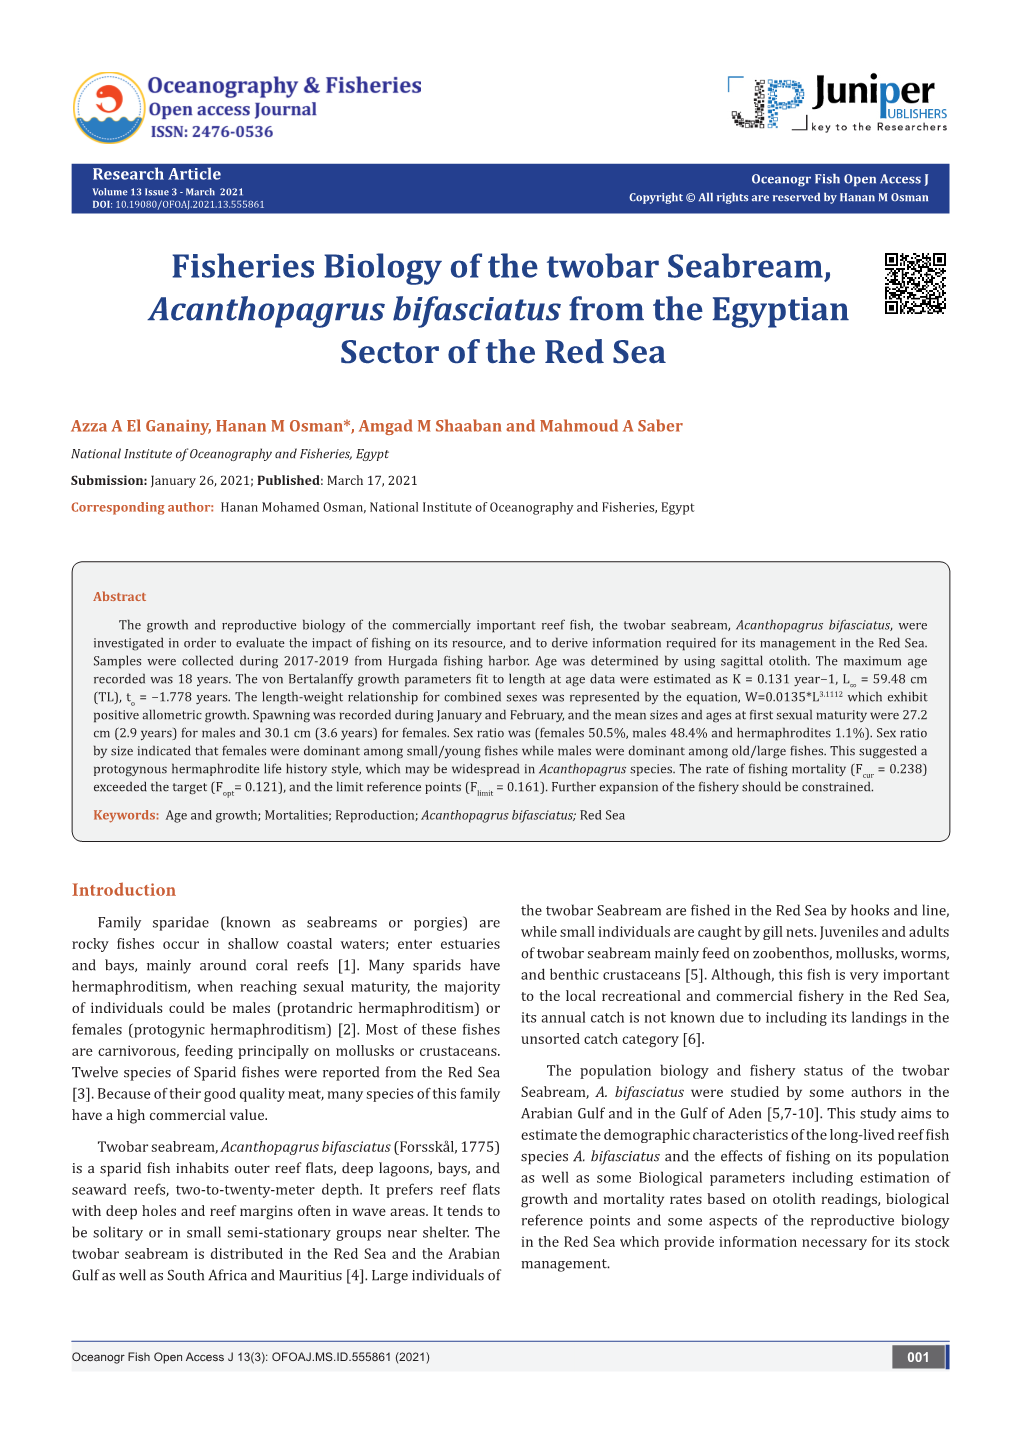 Fisheries Biology of the Twobar Seabream, Acanthopagrus Bifasciatus from the Egyptian Sector of the Red Sea